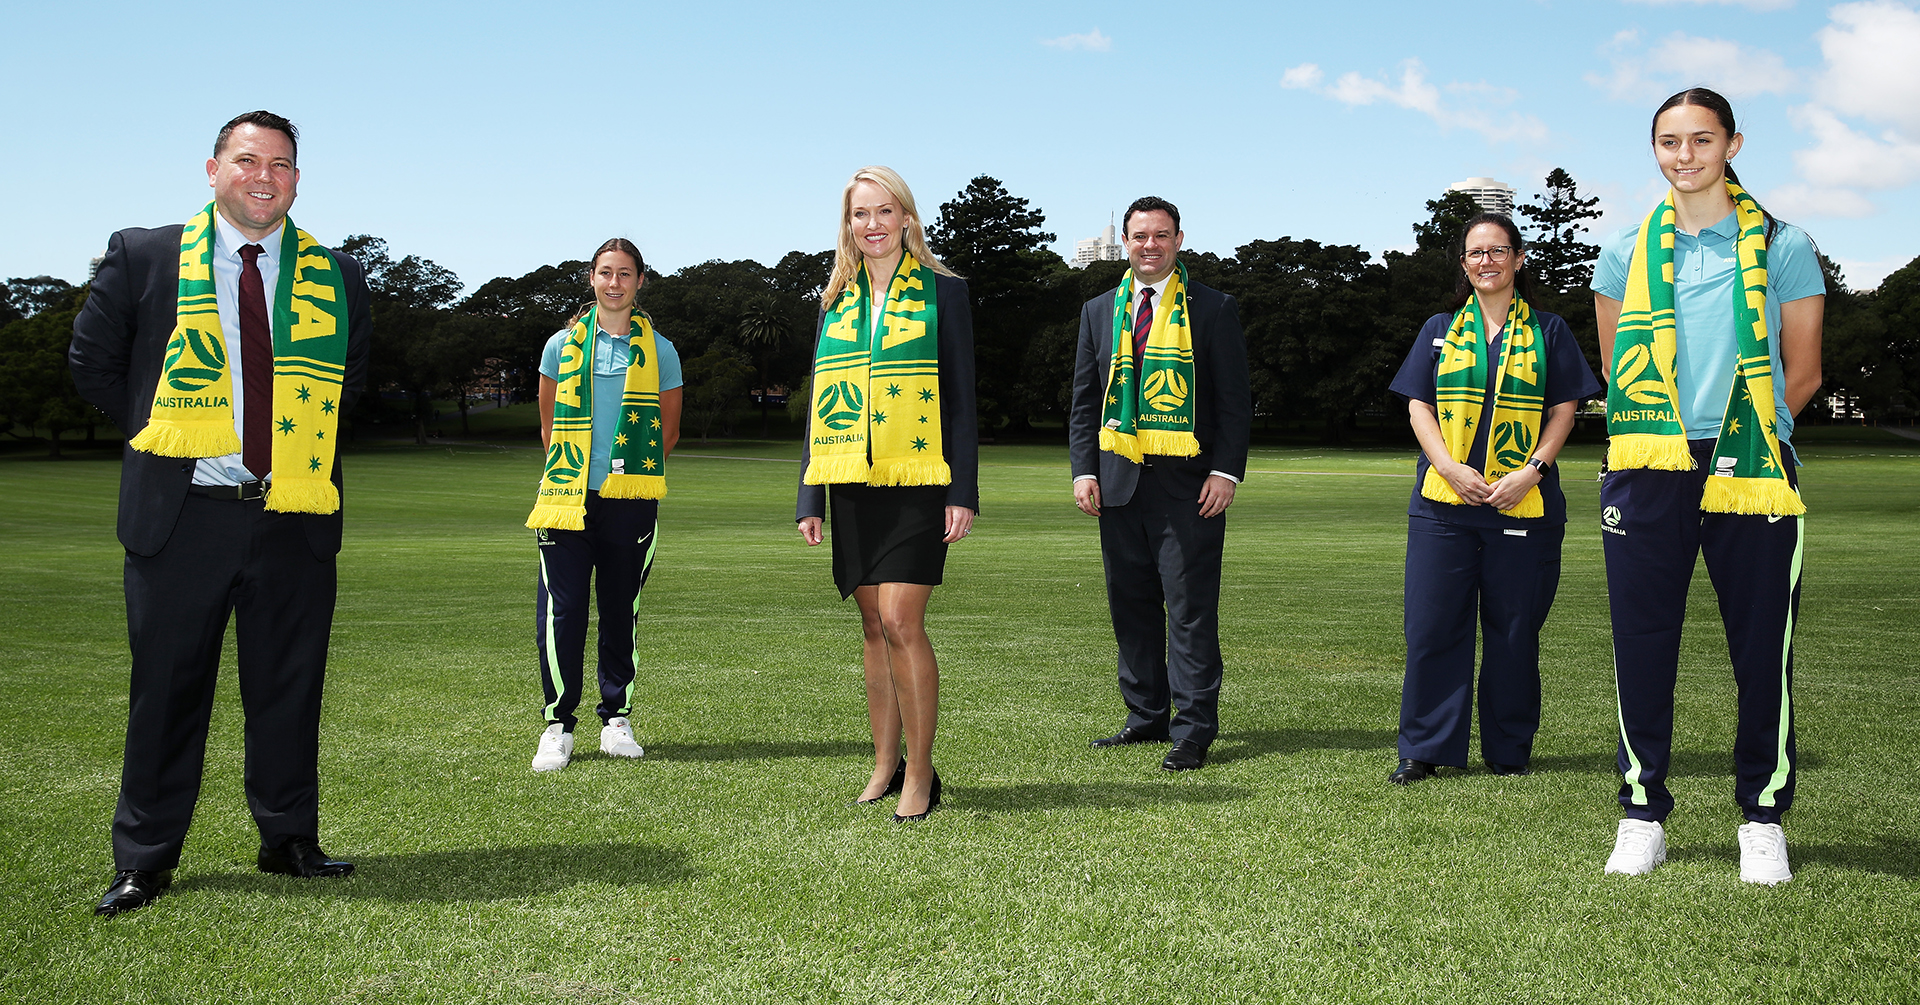 Healthcare workers rewarded with tickets to Matildas mega matches